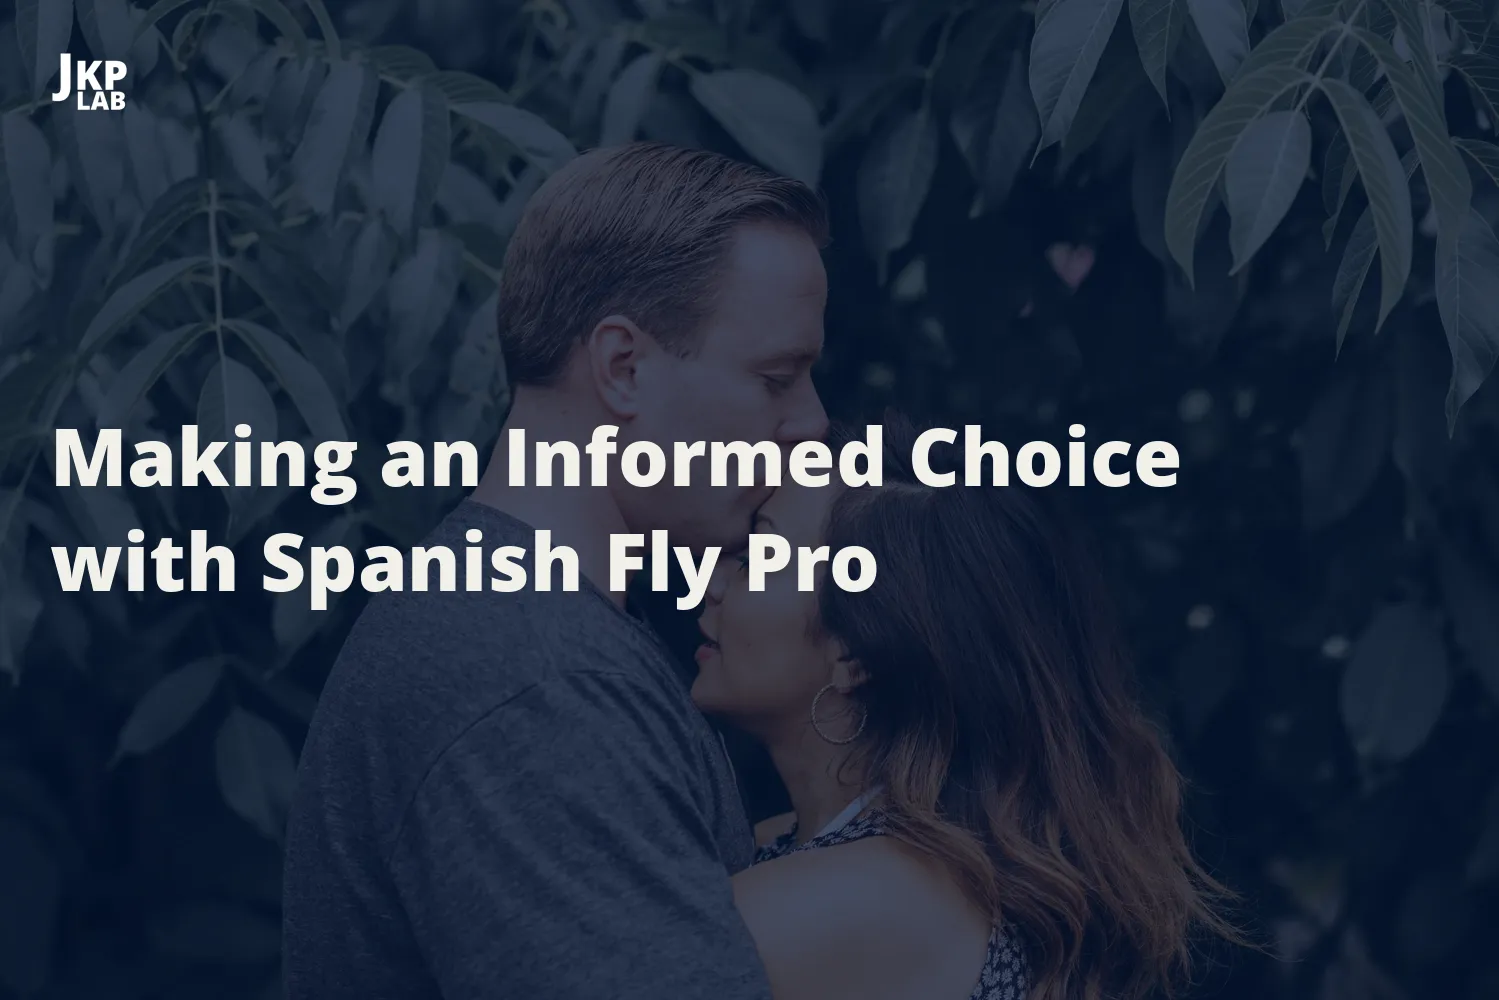 Spanish Fly's Effects on Men